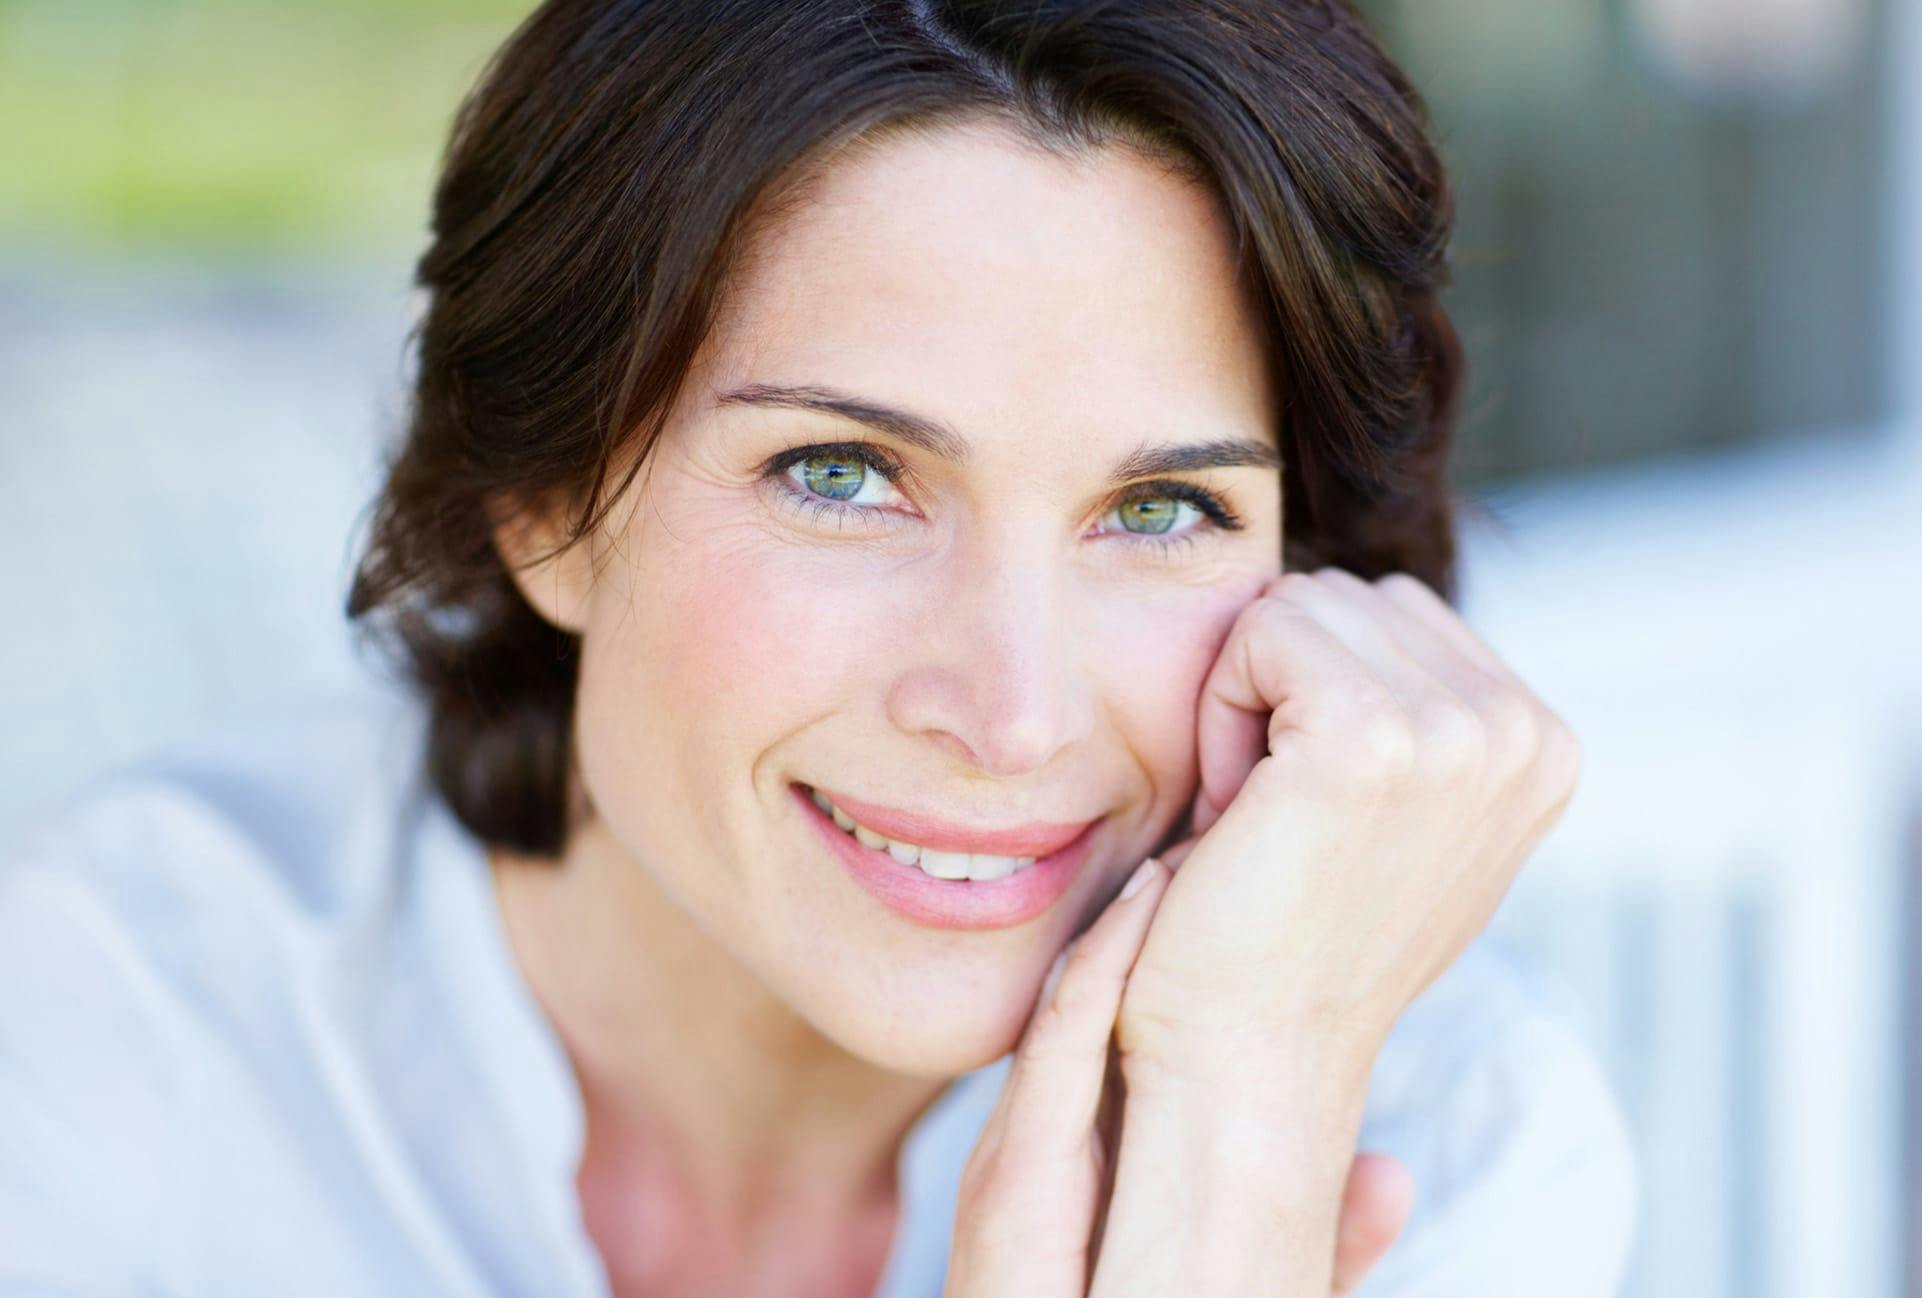 Woman with dark hair and green eyes smiling